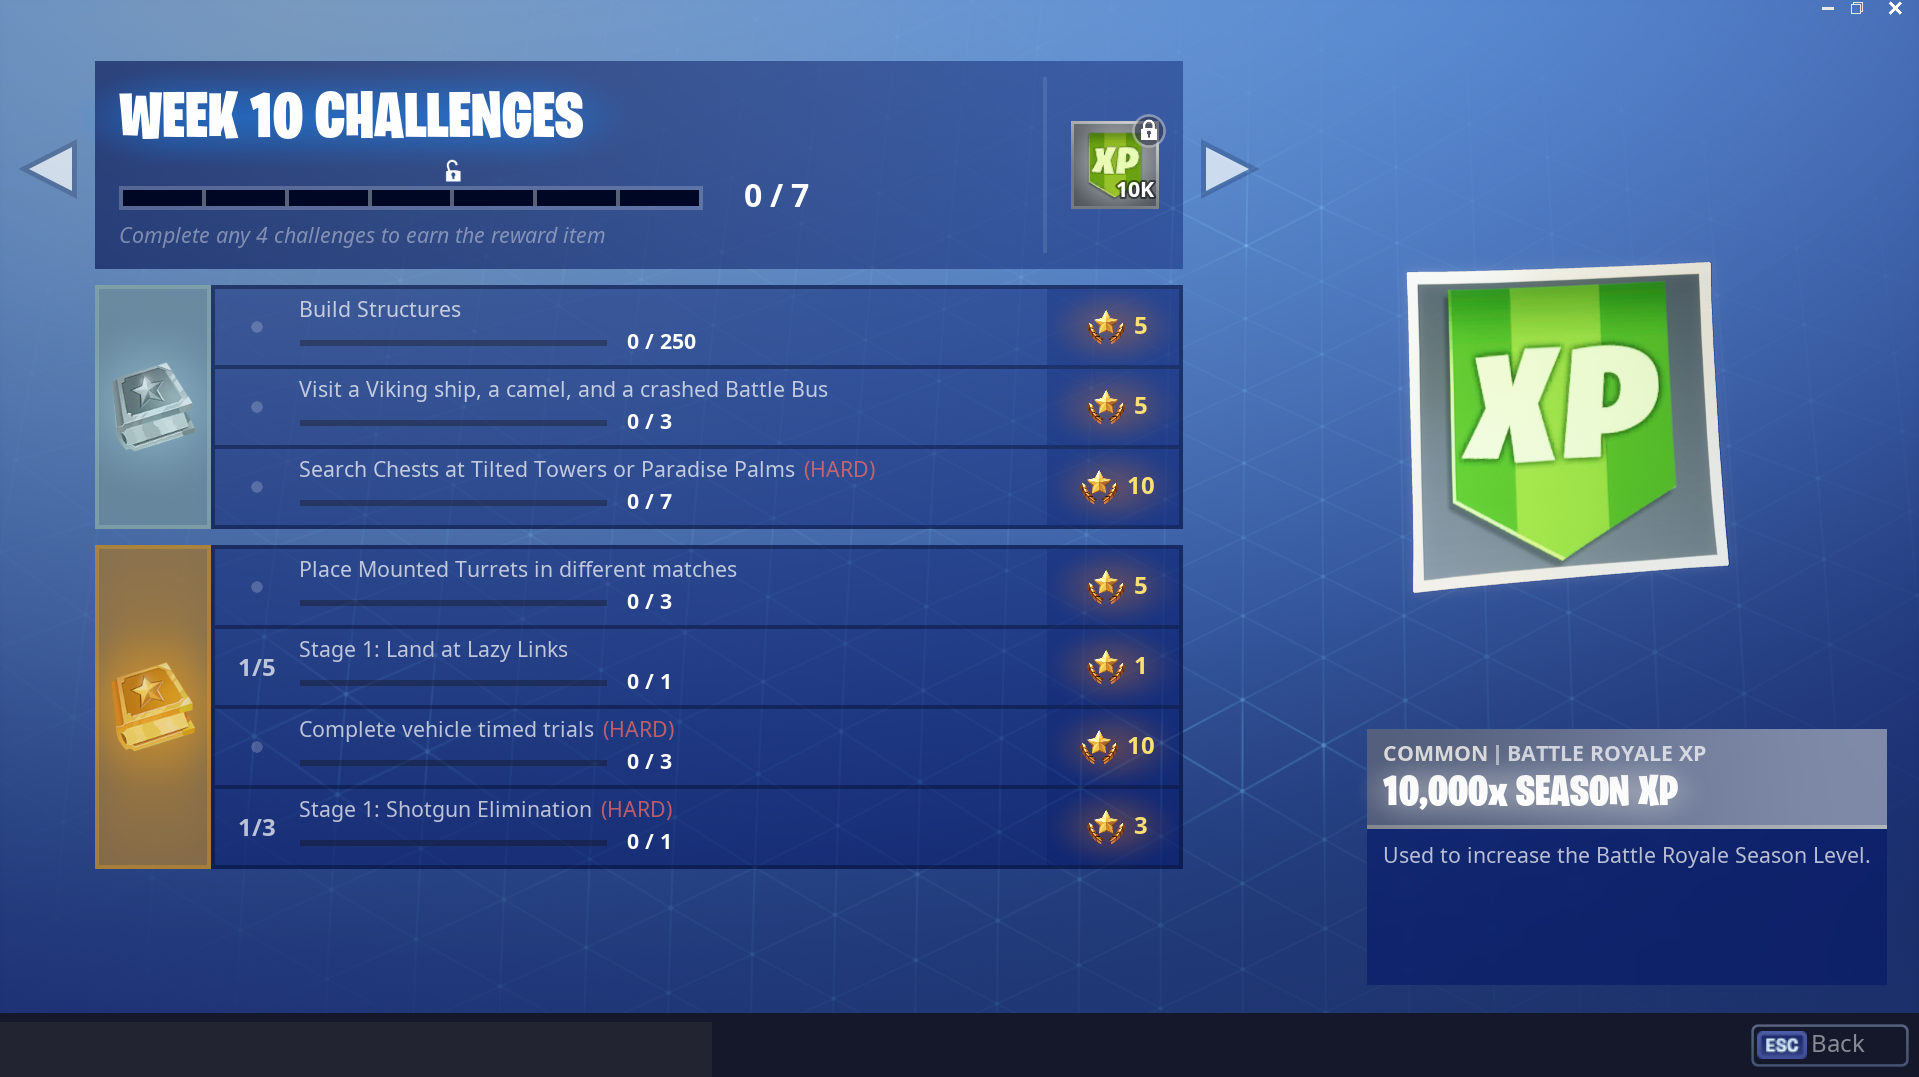 battle pass challenges and solutions for week 10 season 6 of fortnite battle royale fortnite news and statistics ss1 - team rumble fortnite xp